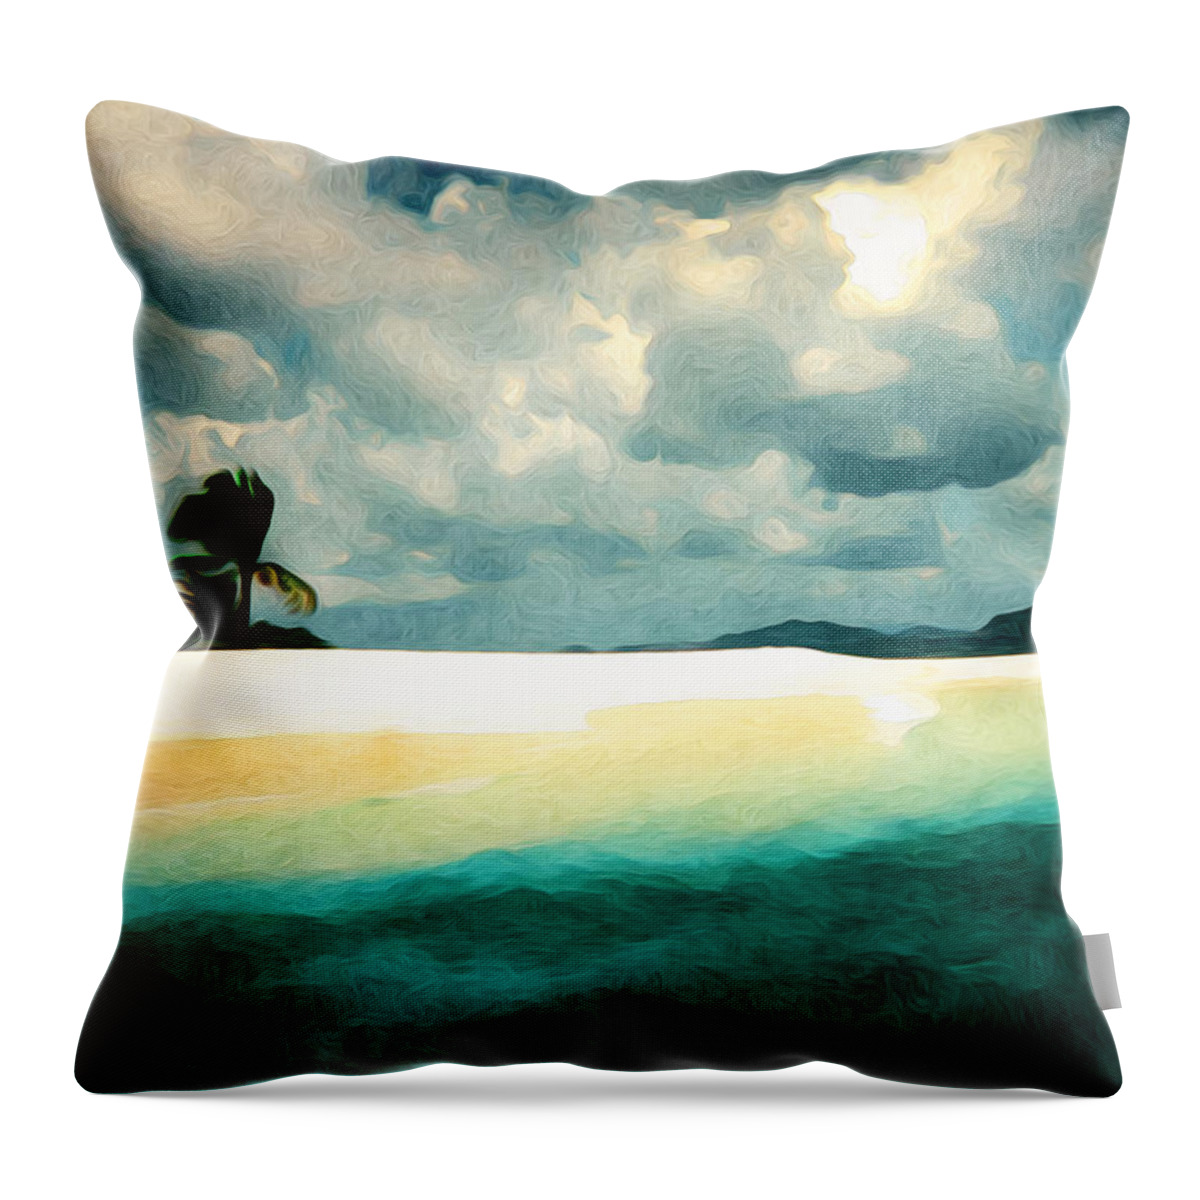 Island Throw Pillow featuring the digital art Sandy Cay by Phil Perkins